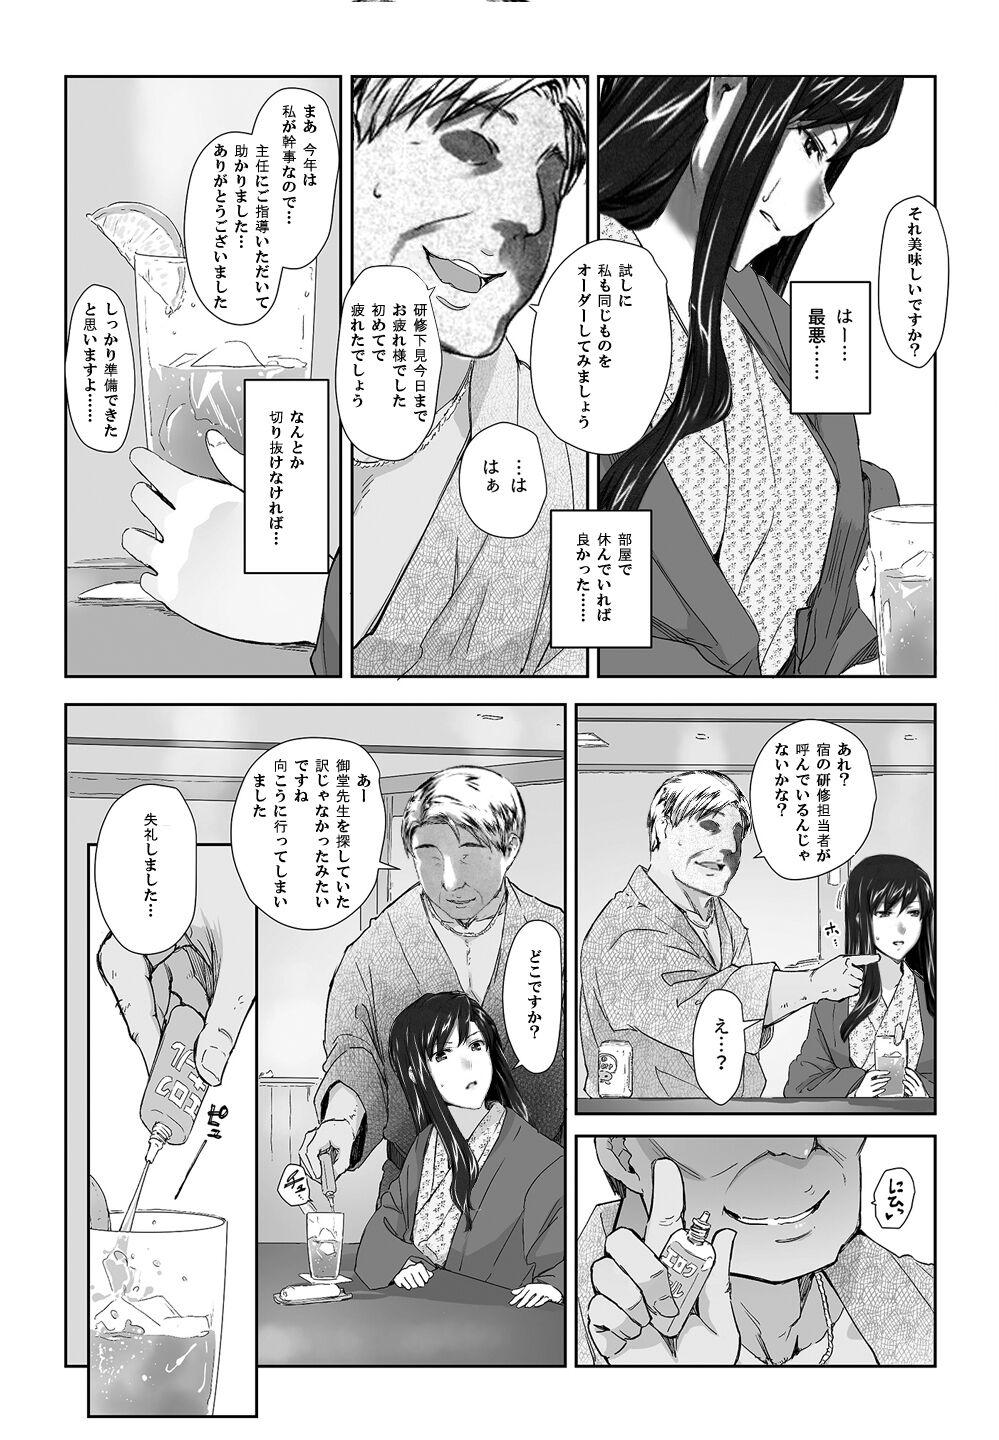 Sakiko-san in delusion Vol.8 ~Sakiko-san's circumstance at an educational training Route3~ (collage) (Continue to “First day of study trip” (page 42) of Vol.1) 3